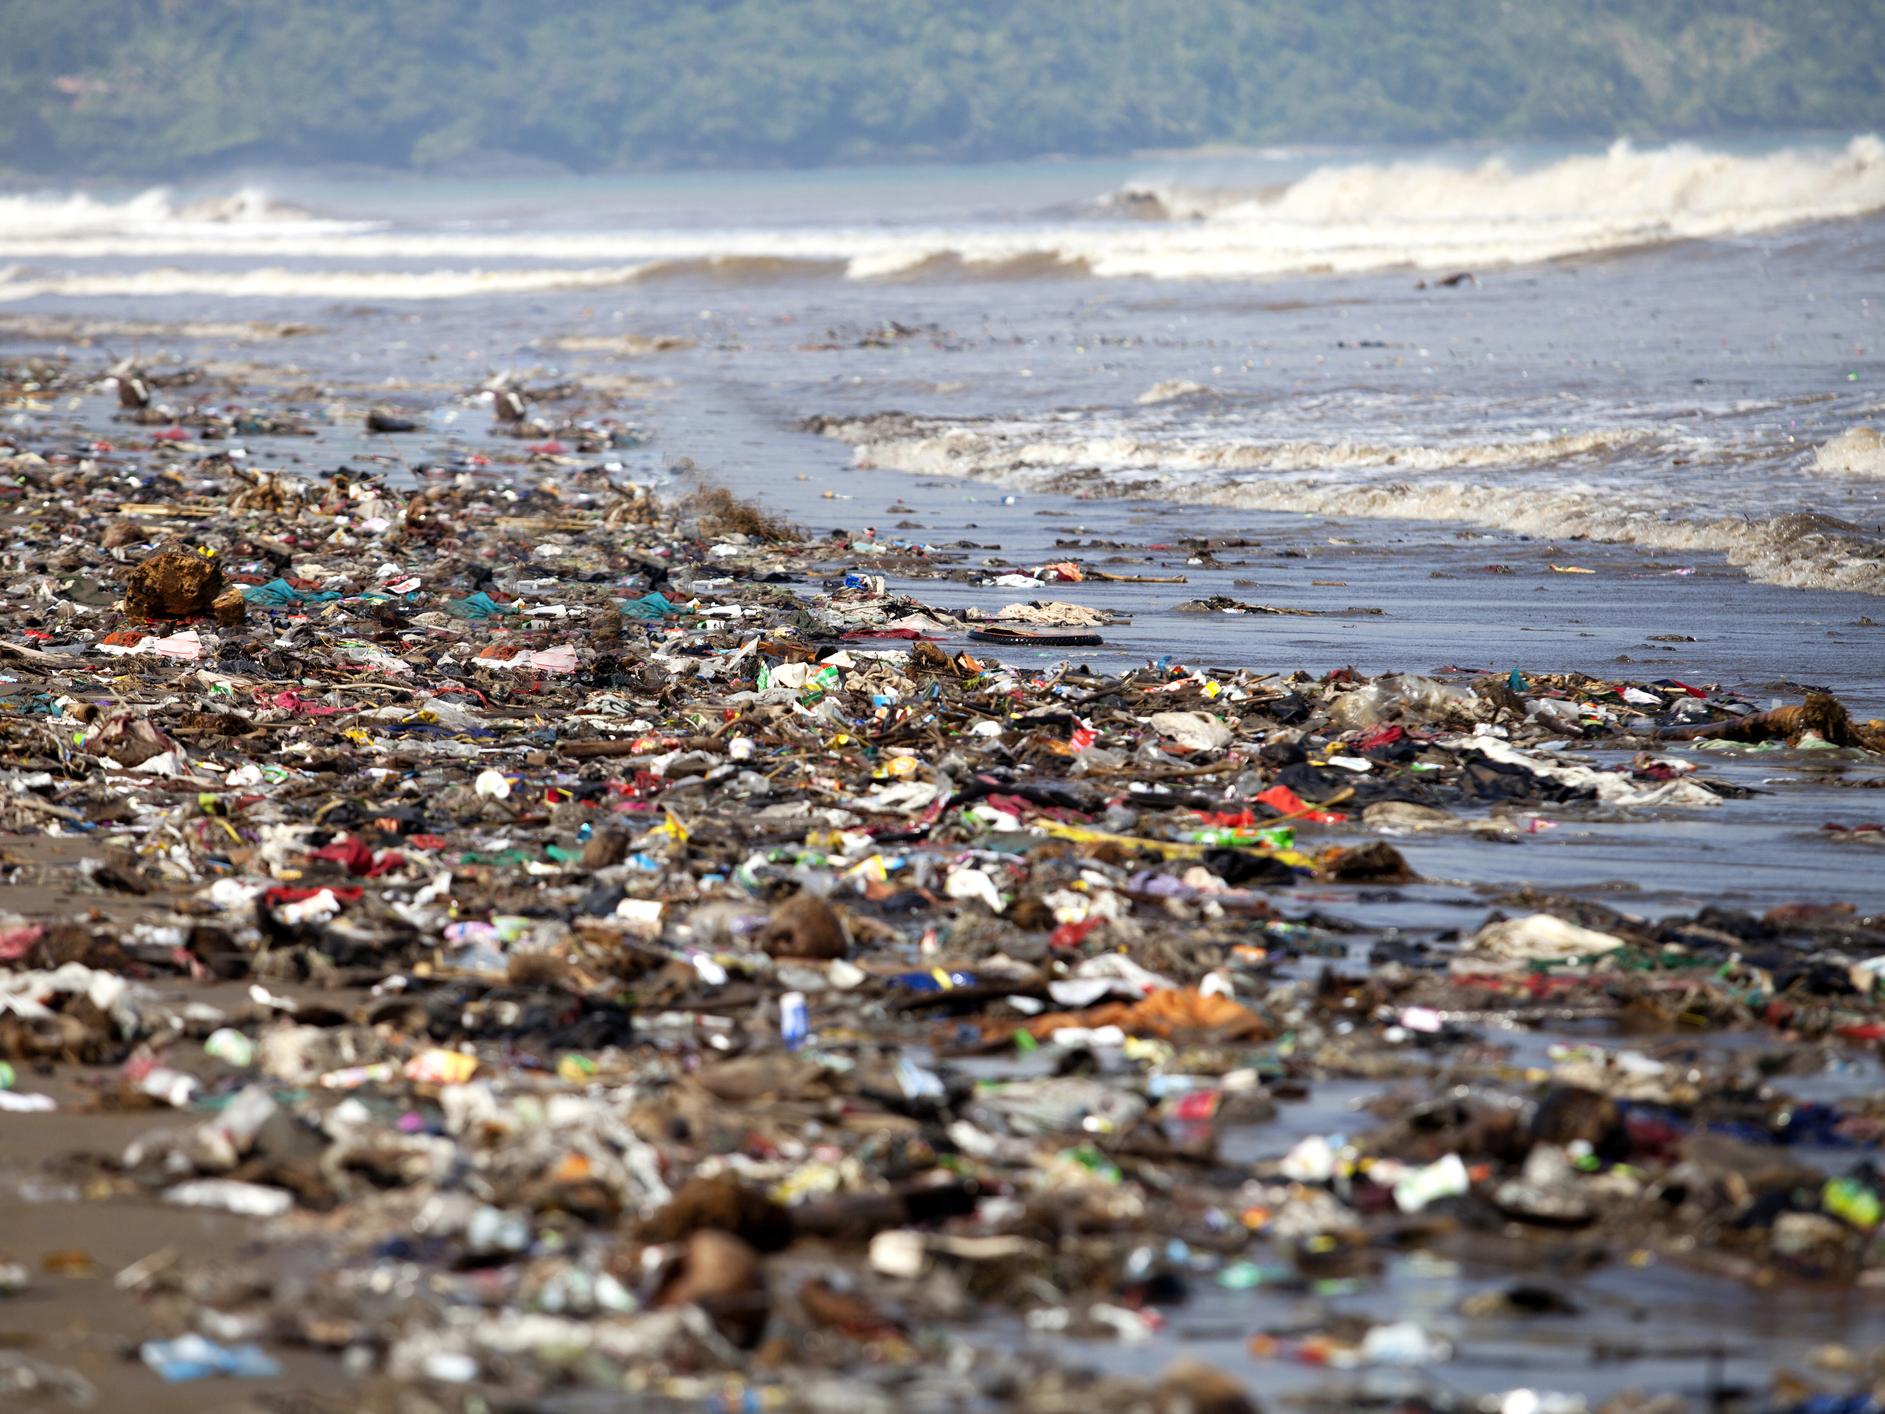 A new report has highlighted plastic pollution as one of the biggest threats facing the oceans